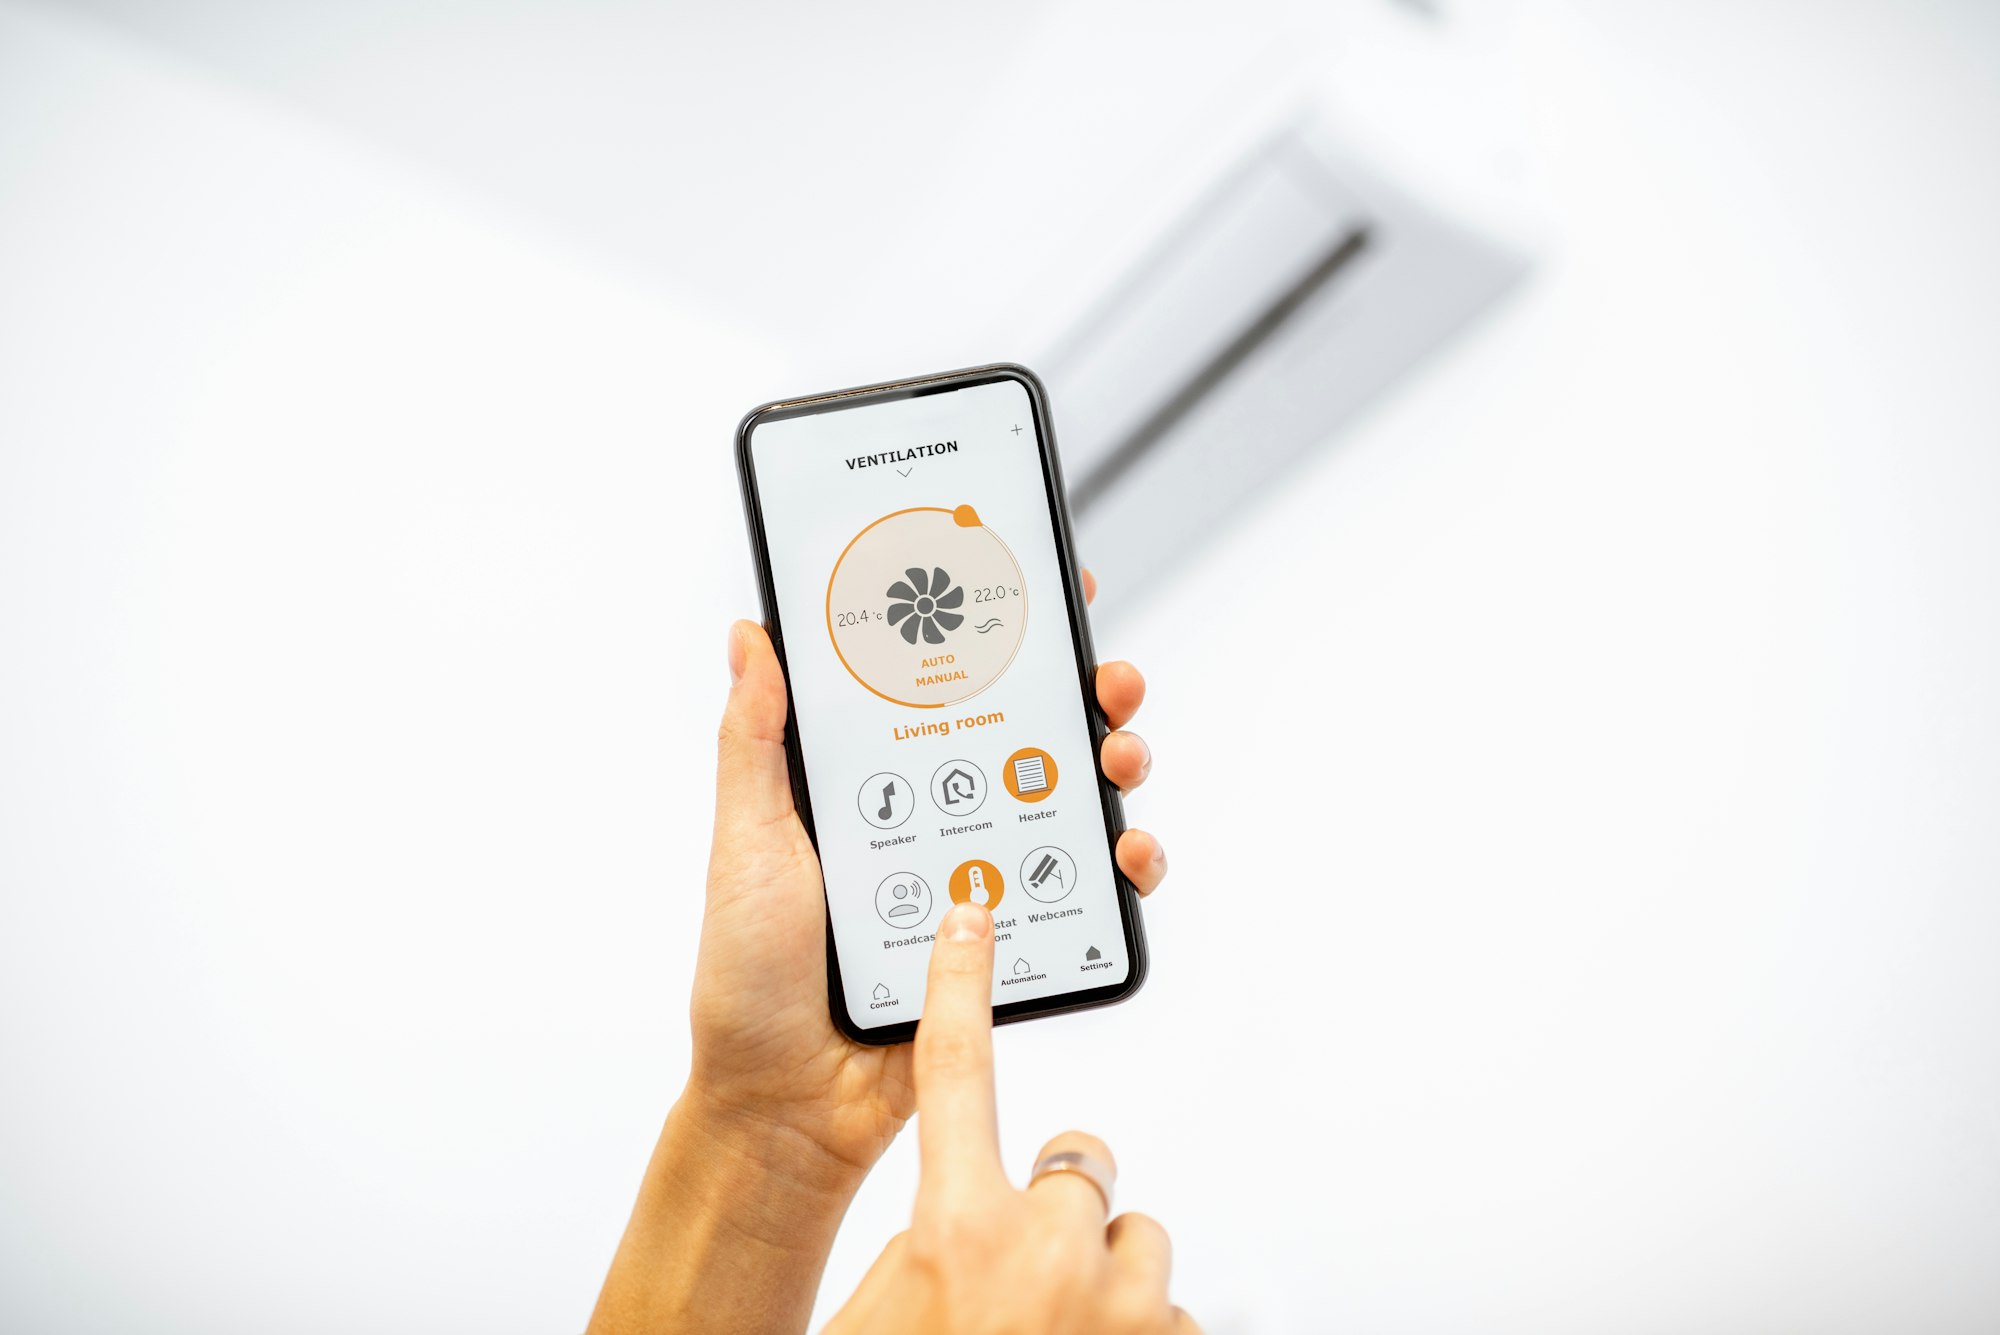 Controlling ventilation with a smart phone at home